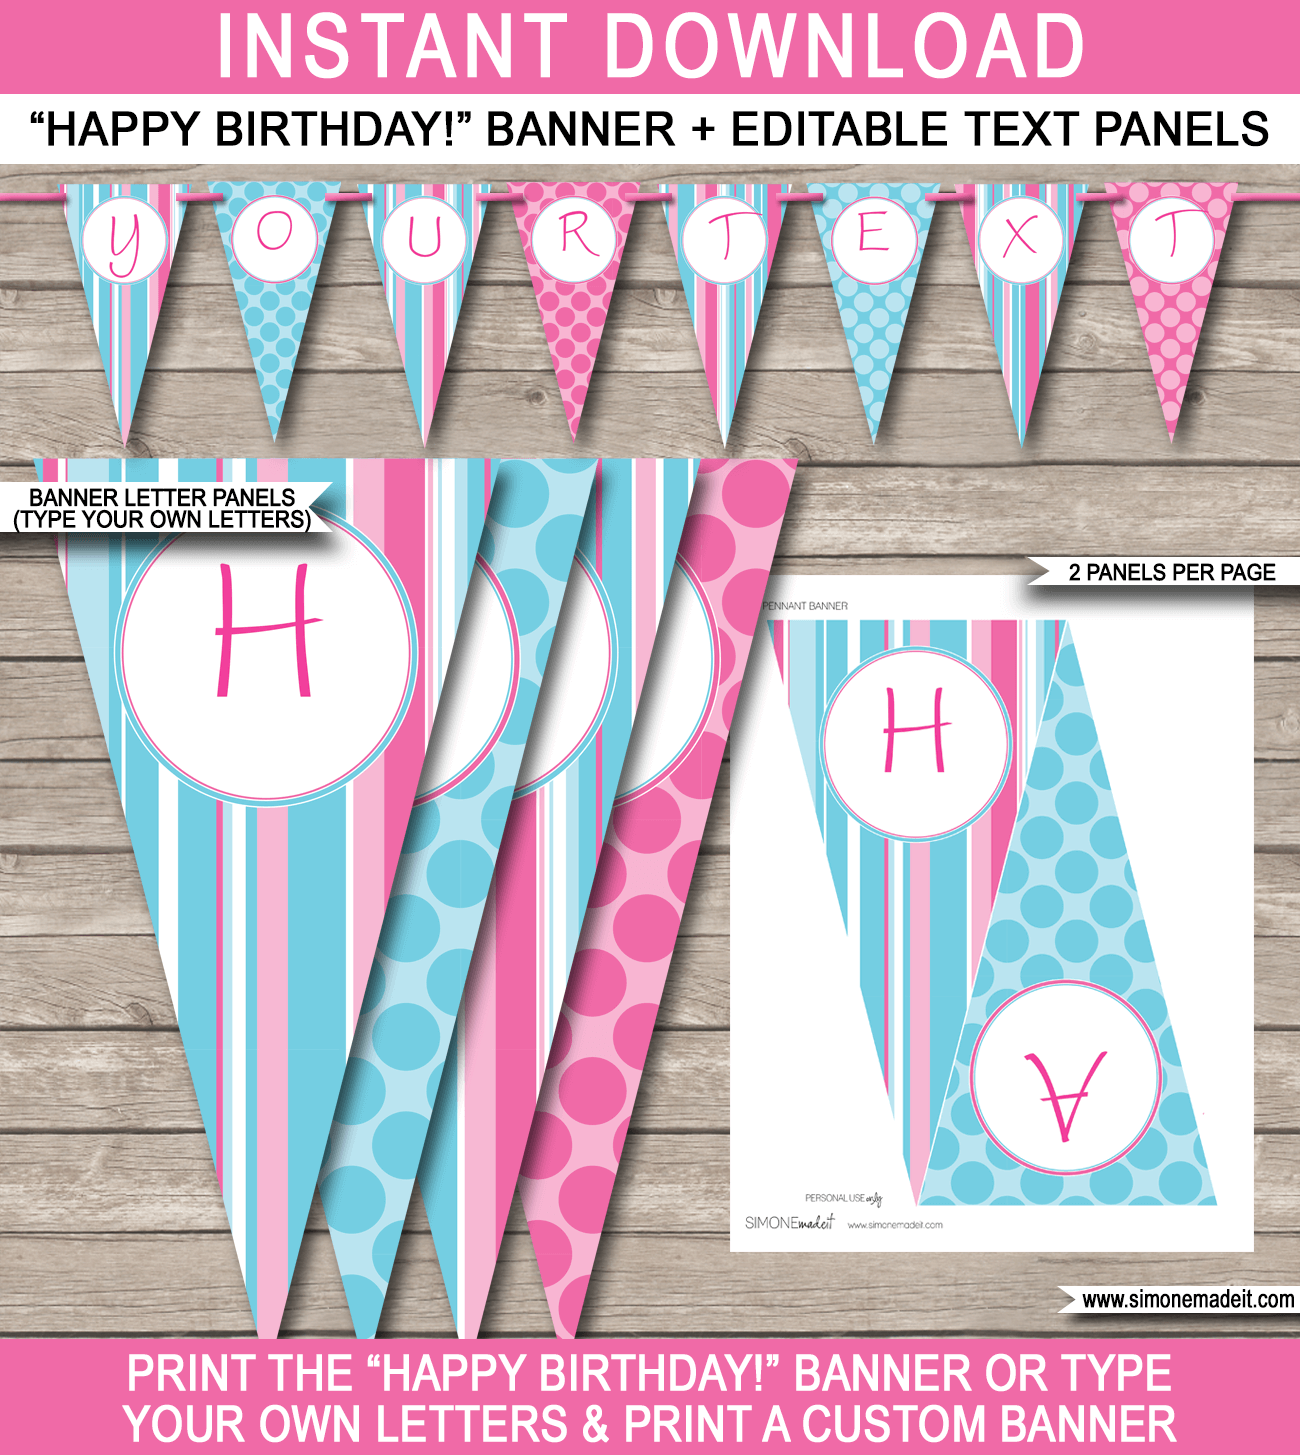 Girls Birthday Party Pennant Banner Template - Happy Birthday Bunting Pennants - Editable and Printable DIY Template - INSTANT DOWNLOAD $4.50 via simonemadeit.com